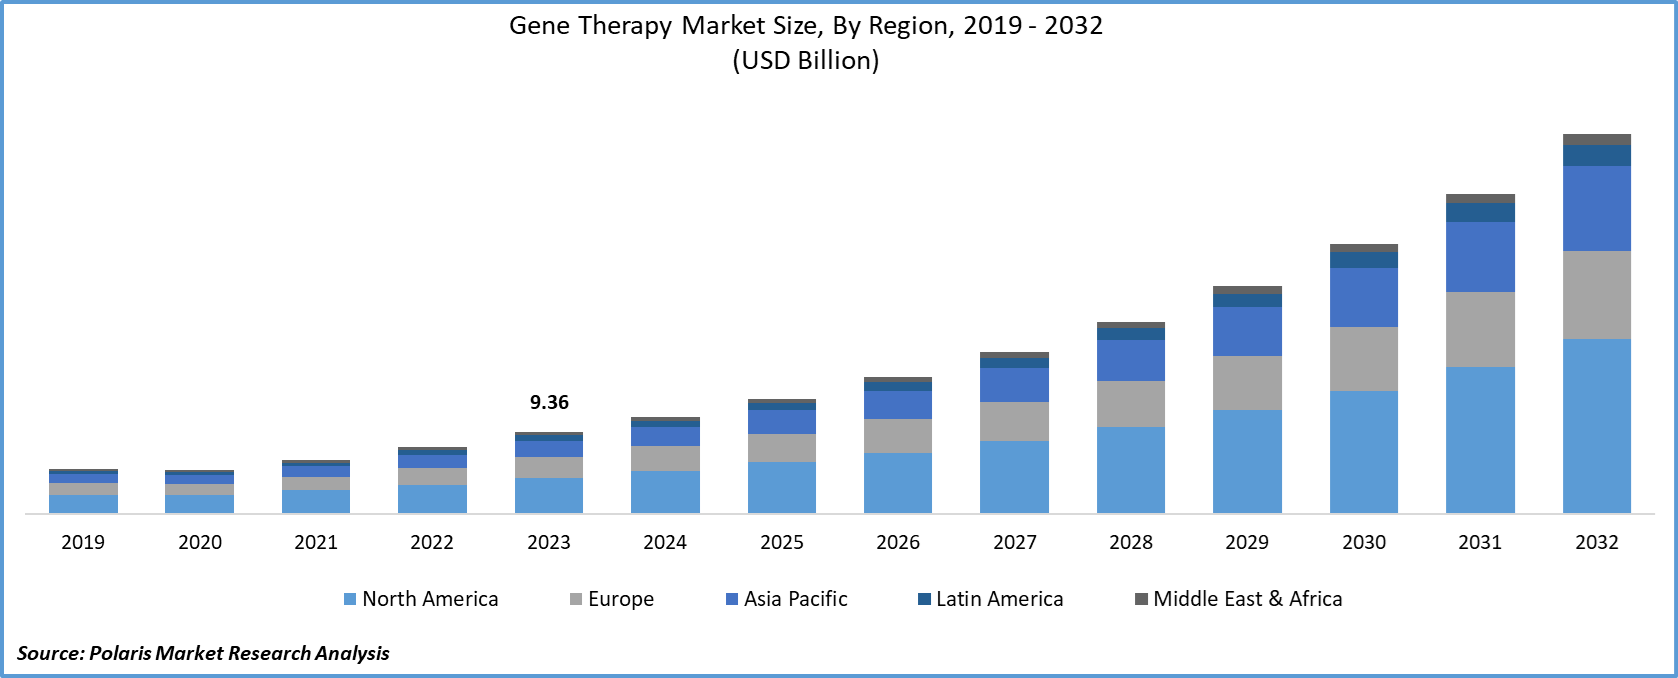 Gene Therapy Market Share